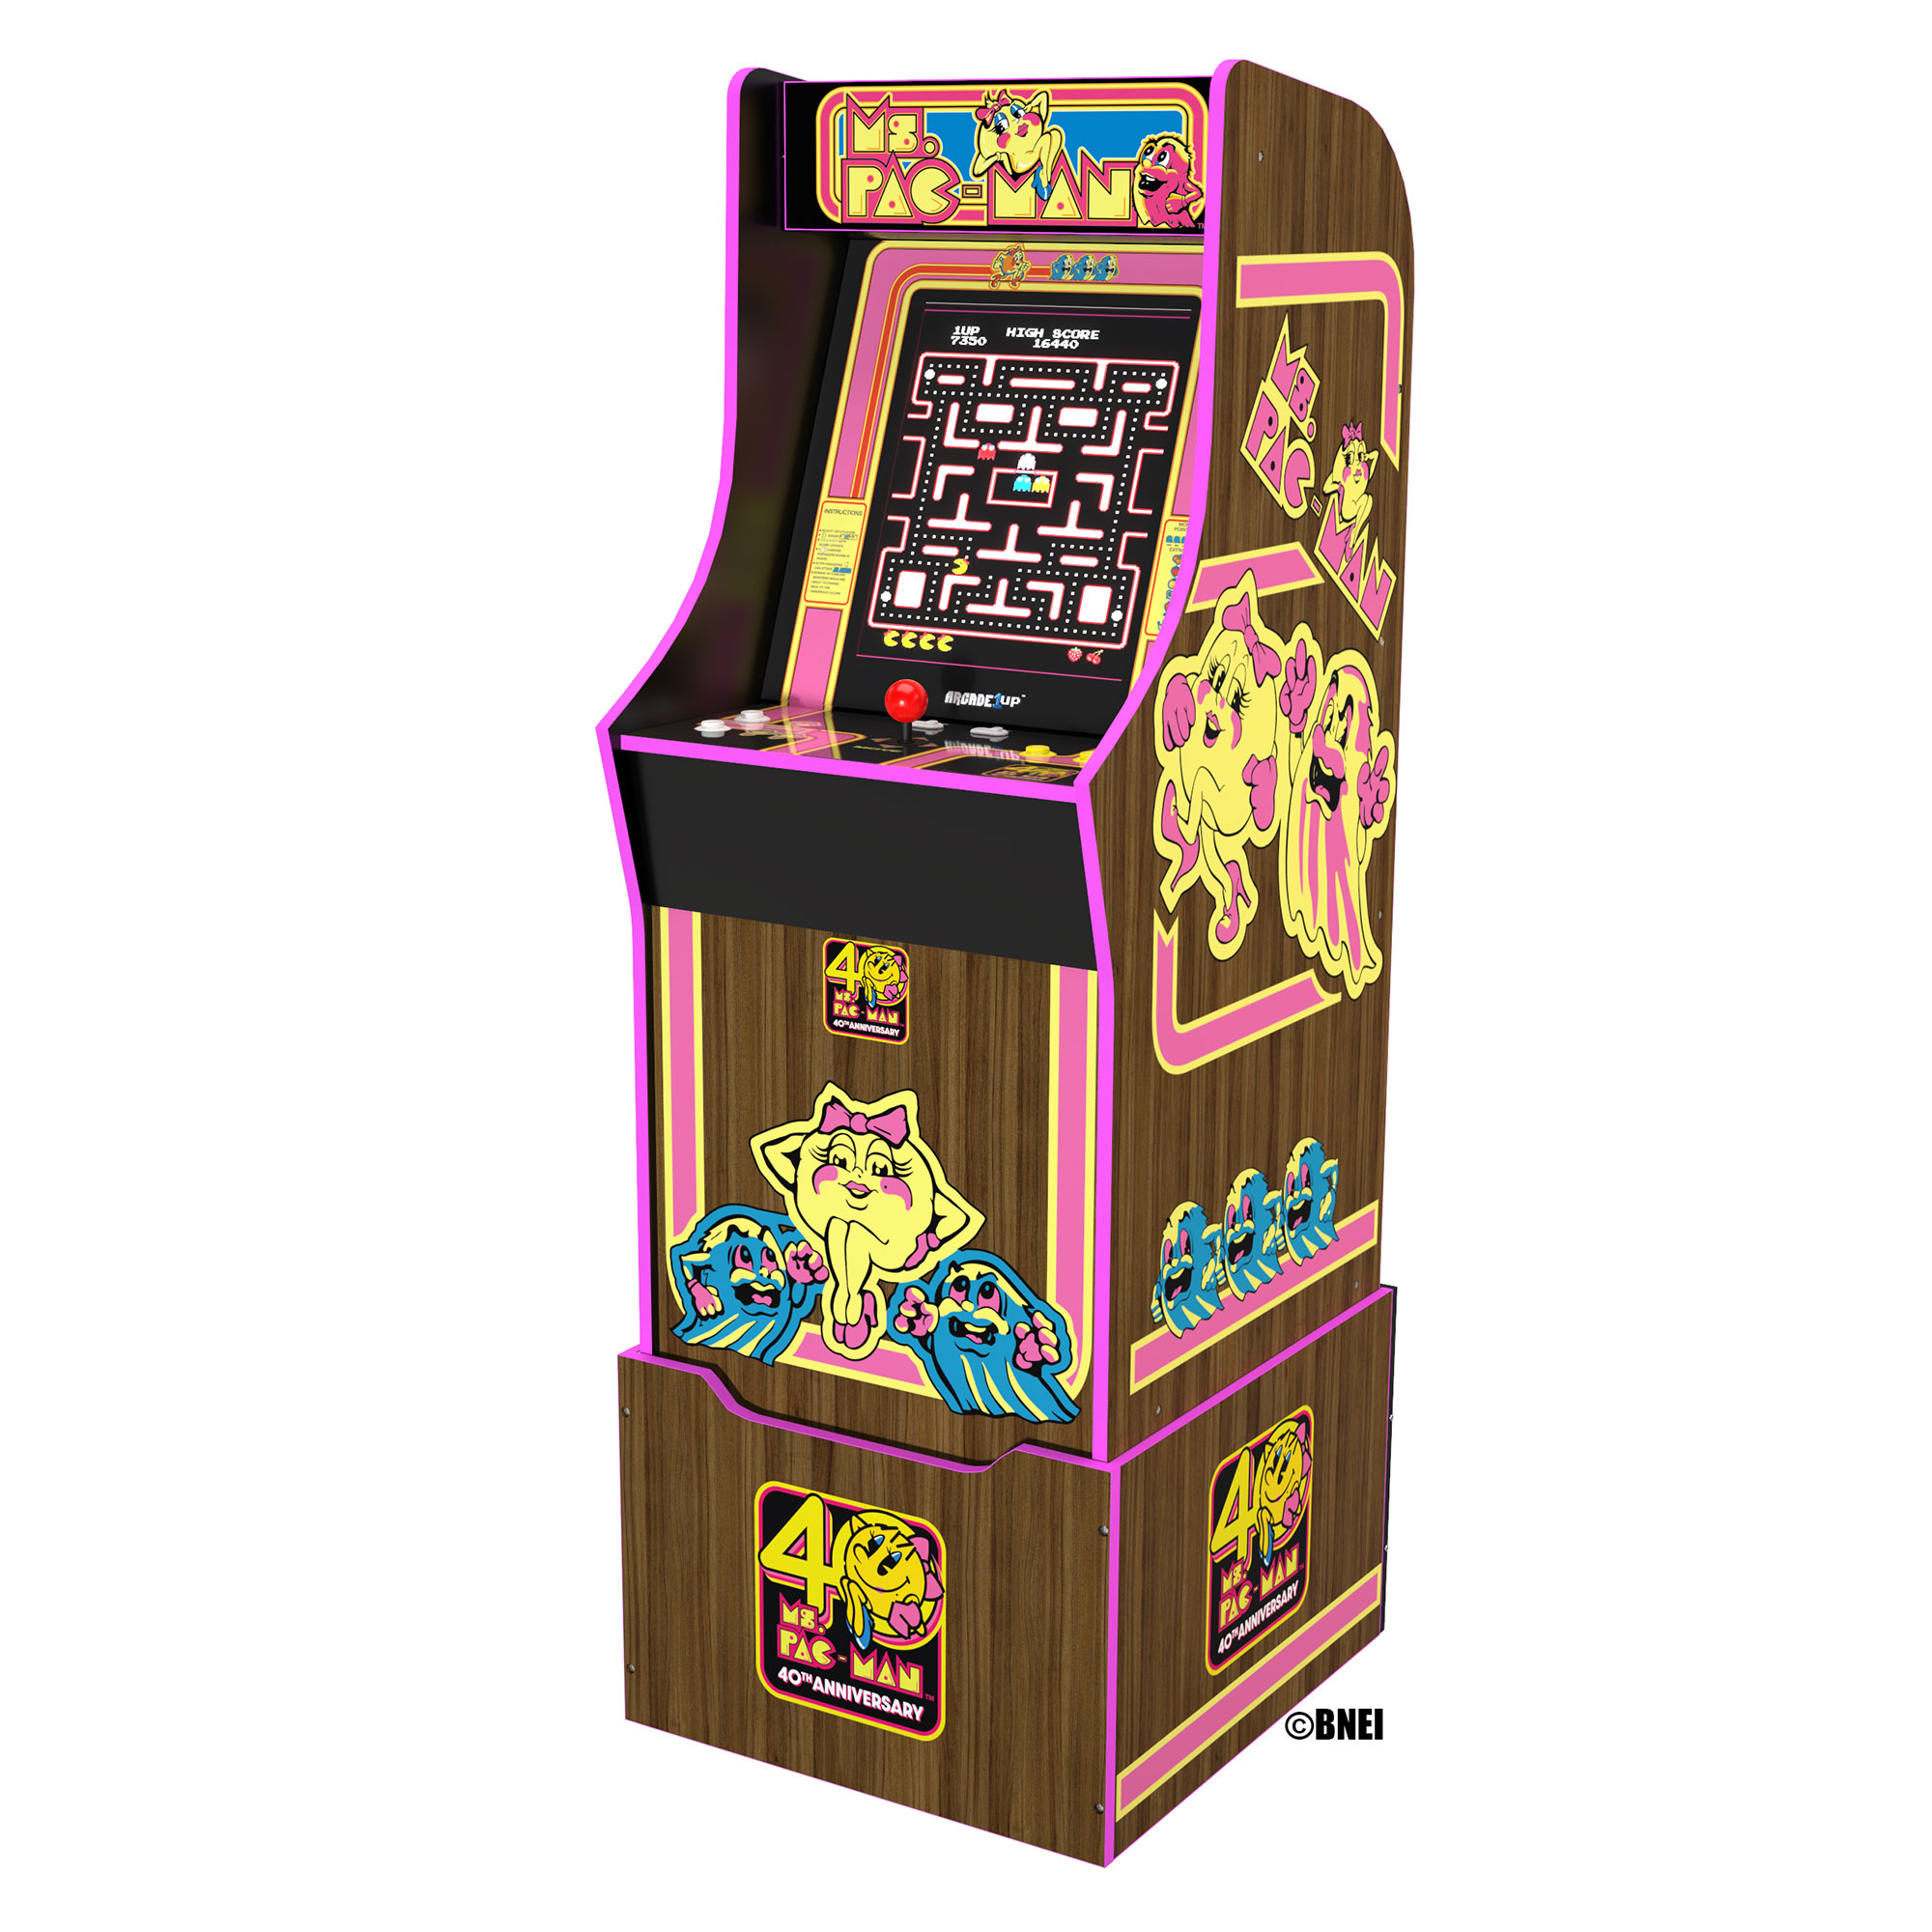 Arcade1Up Ms. Pac Man 40th Anniversary 10 In 1 Arcade Video Game Machine - image 1 of 8